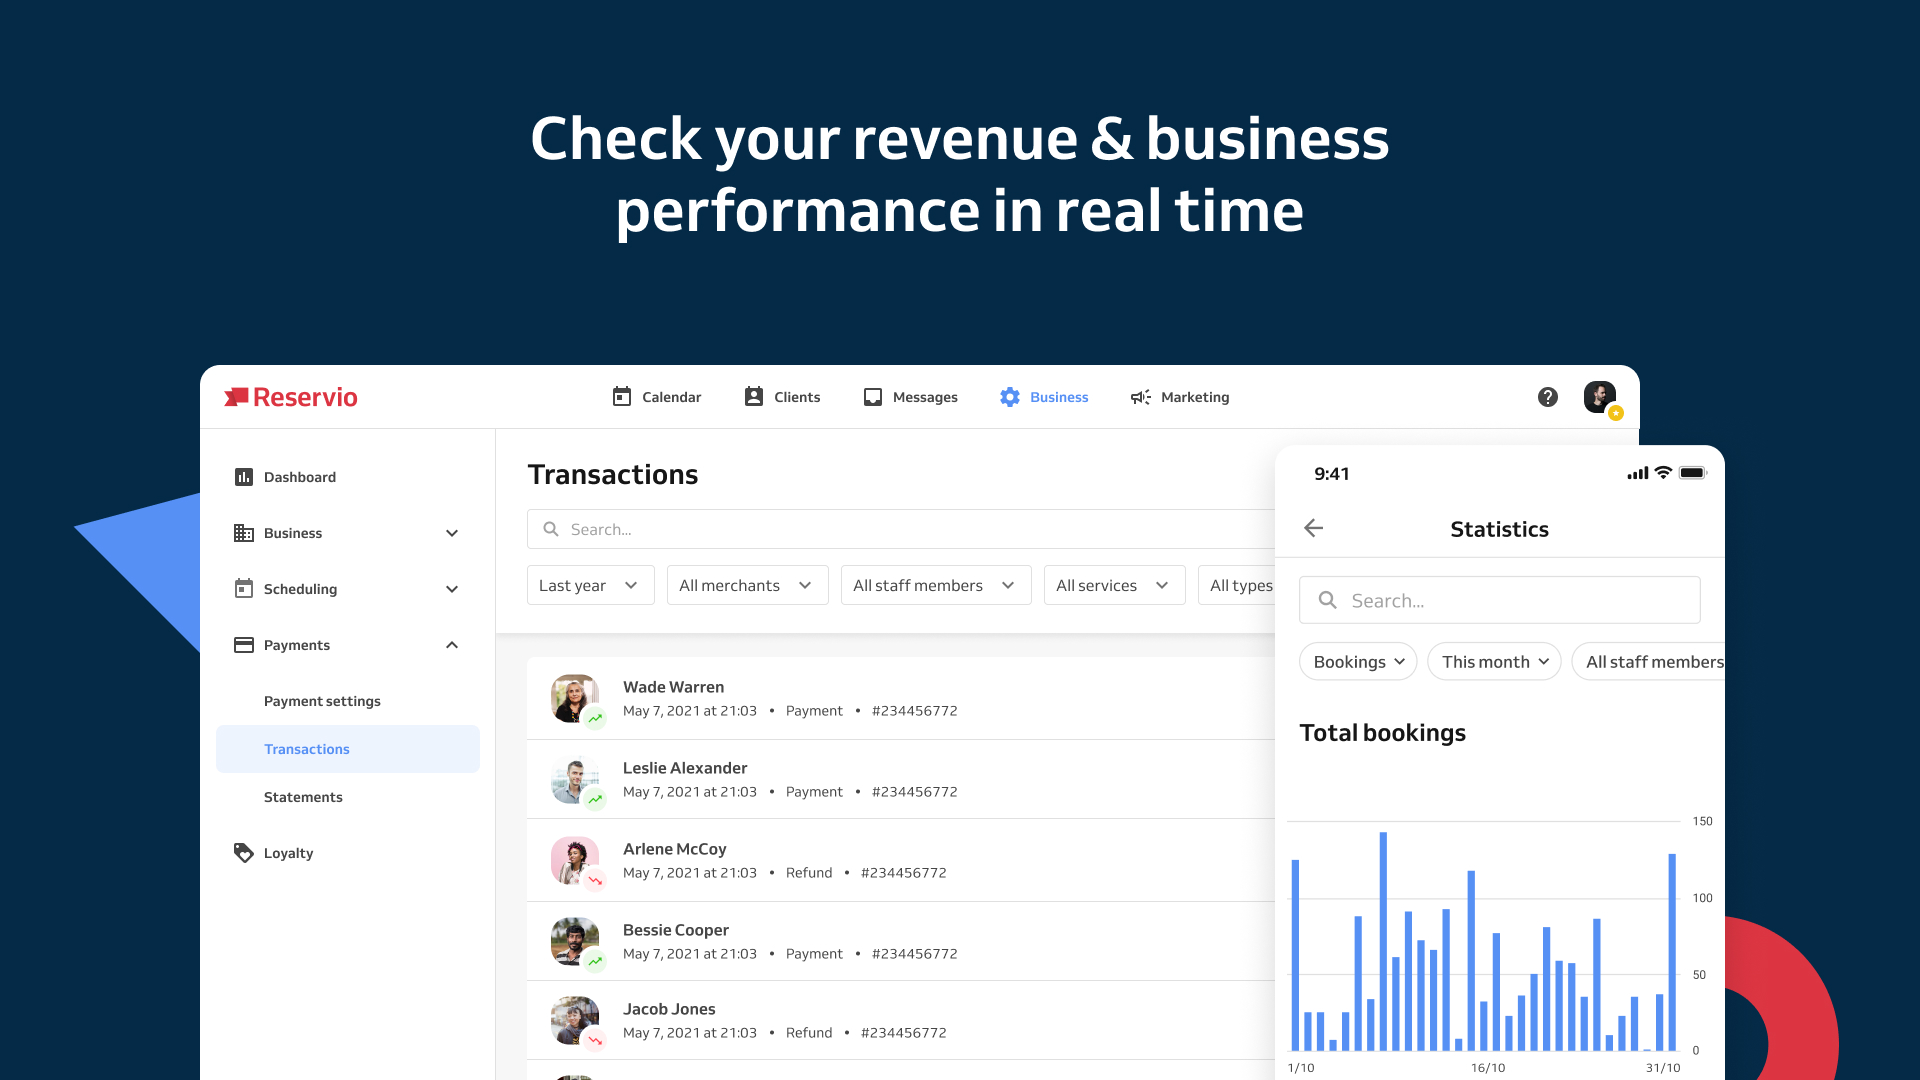 Check your revenue & business performance in real time